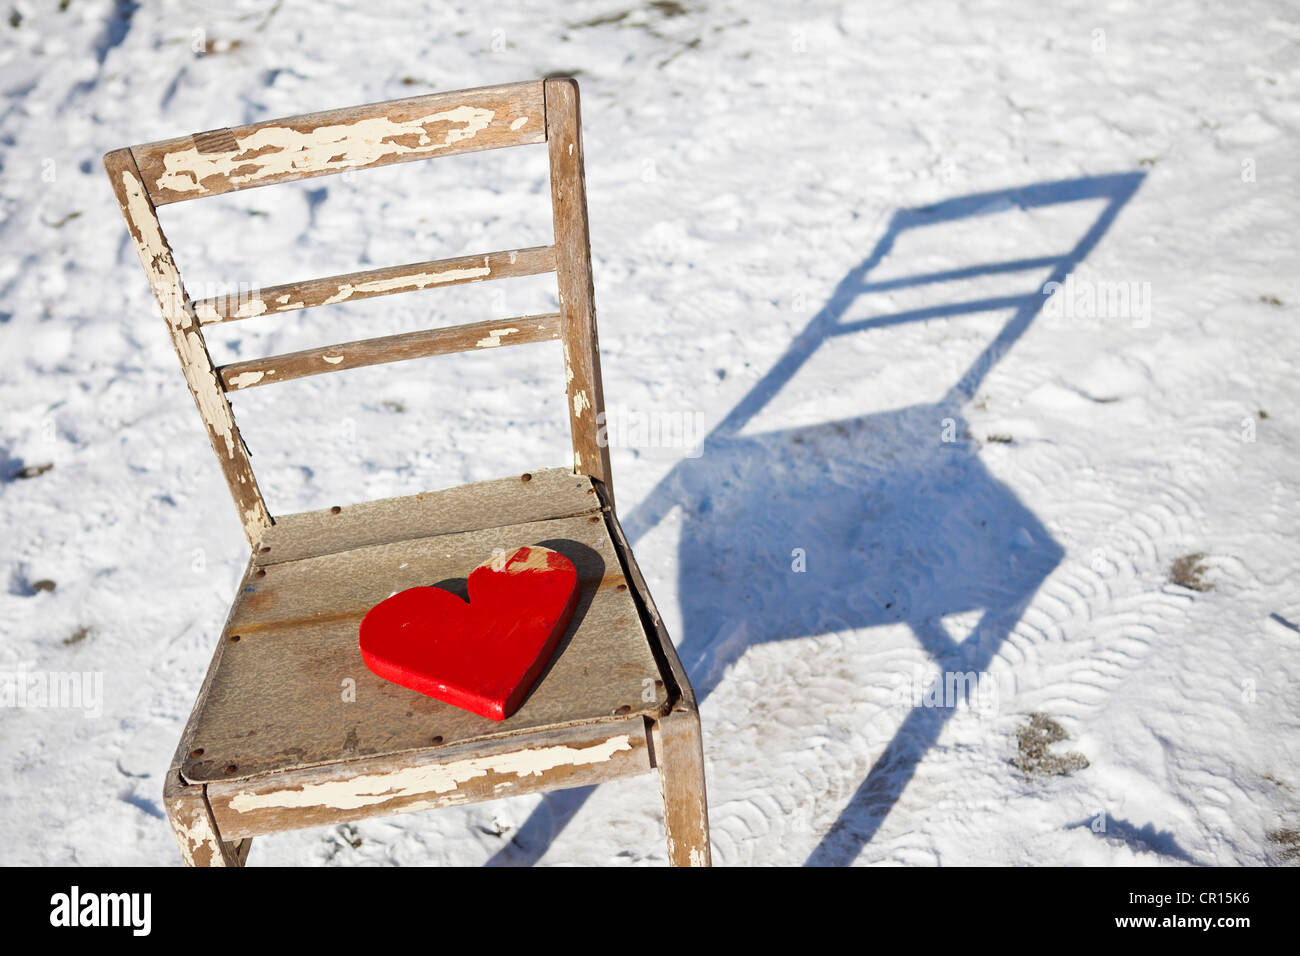 Red wooden heart on an old chair in the snow Stock Photo